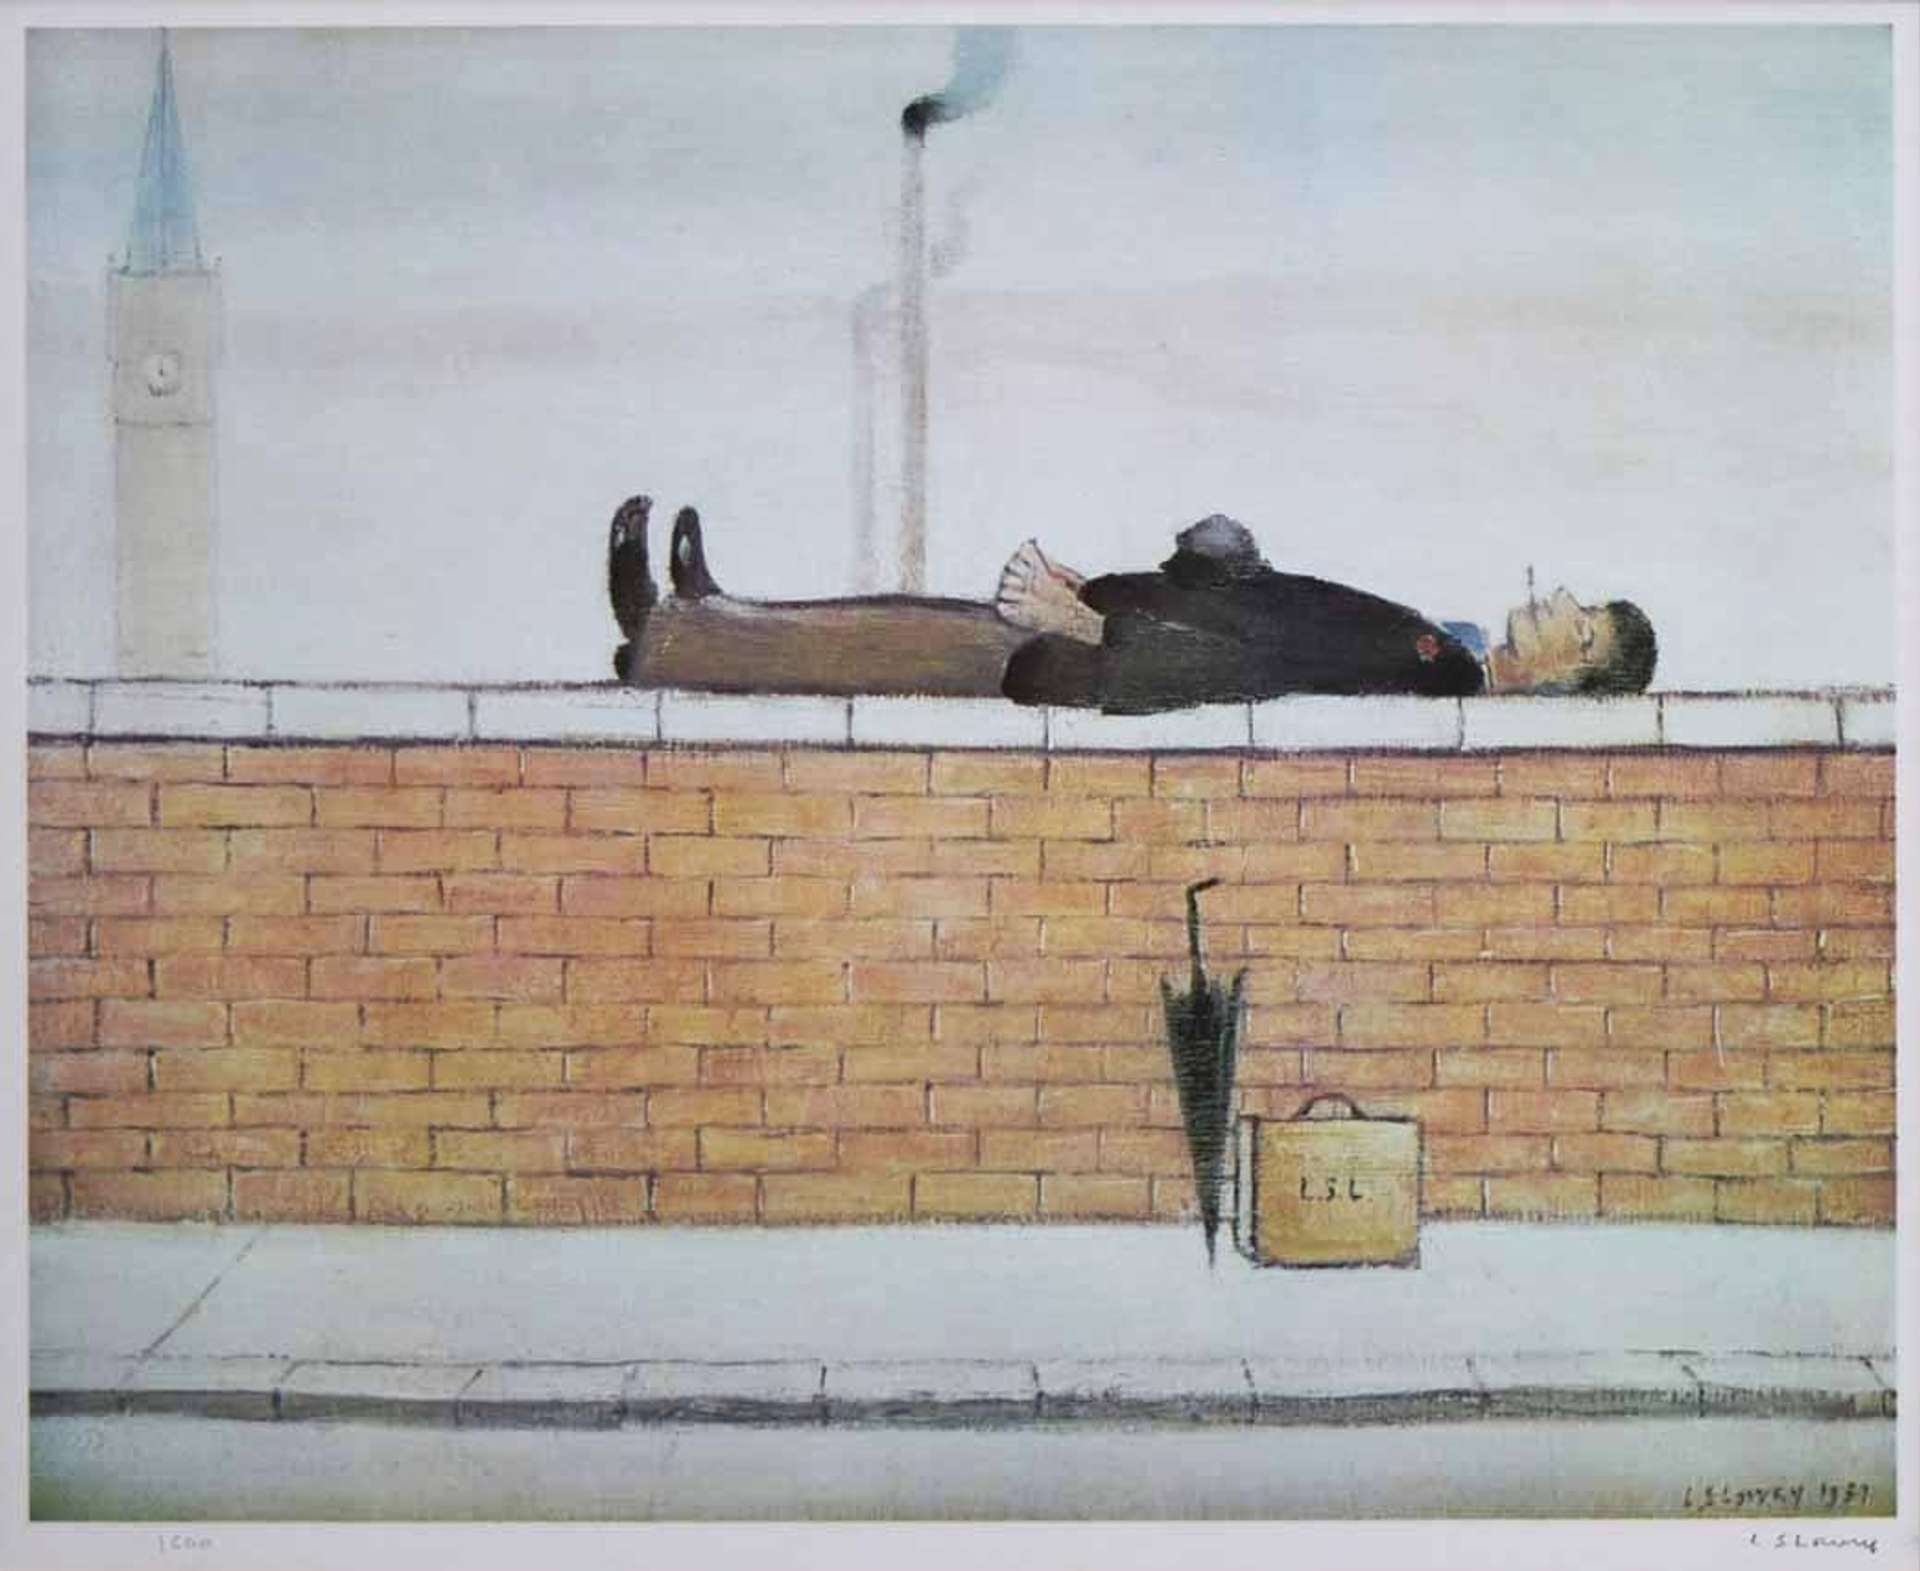 L.S. Lowry’s Man Lying on Wall. A lithograph of a man lying on a brick wall, smoking a cigarette with his briefcase and umbrella against the wall. 